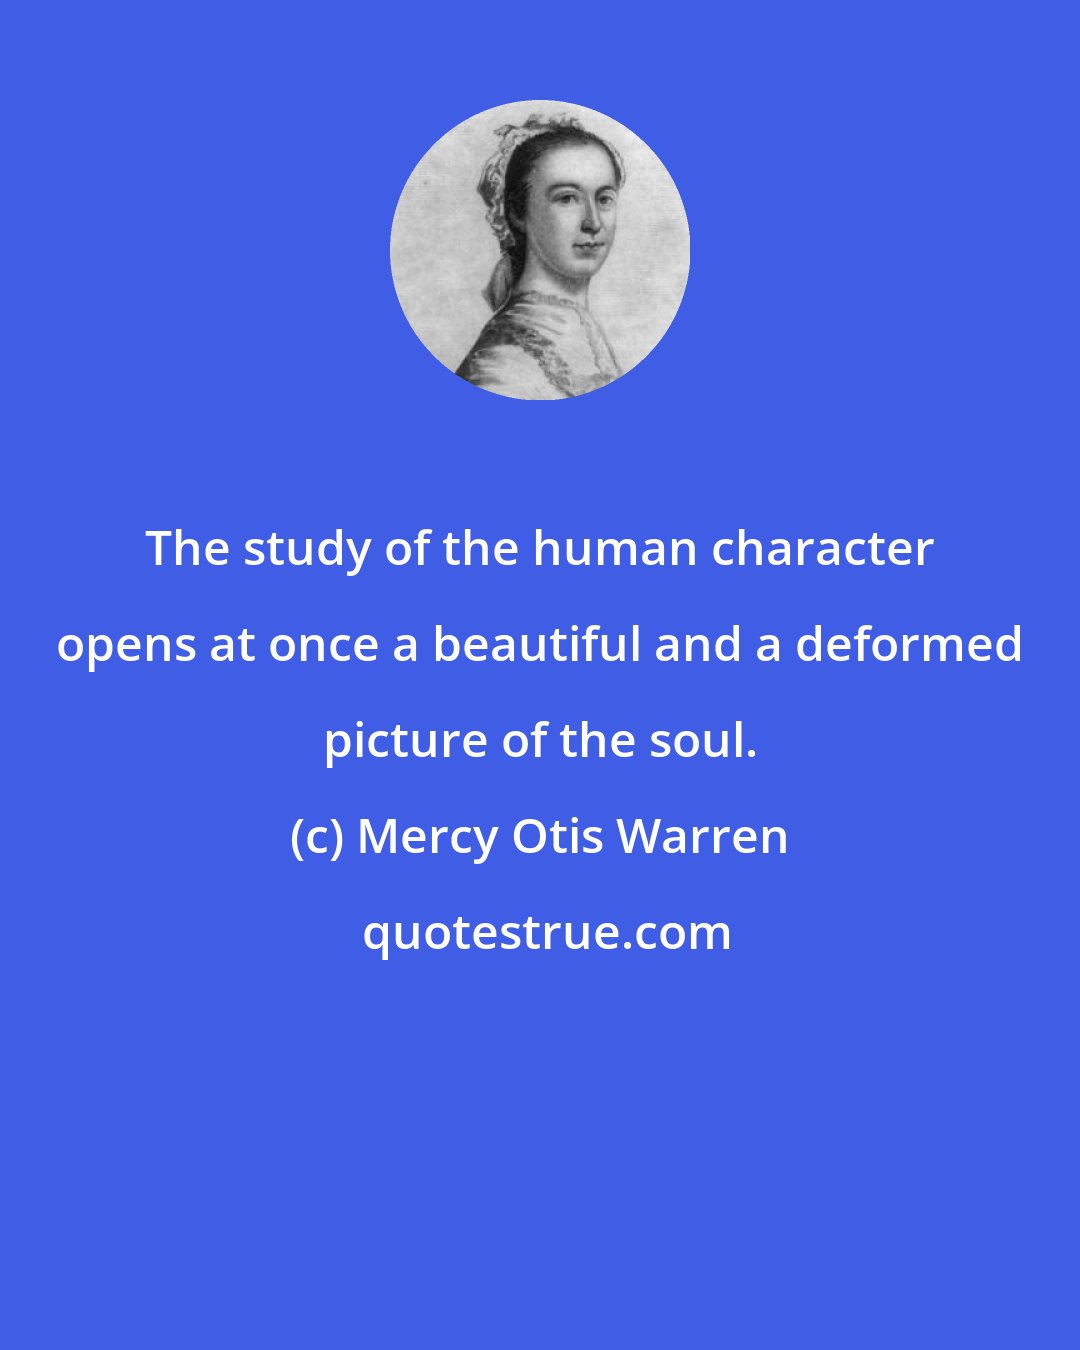 Mercy Otis Warren: The study of the human character opens at once a beautiful and a deformed picture of the soul.